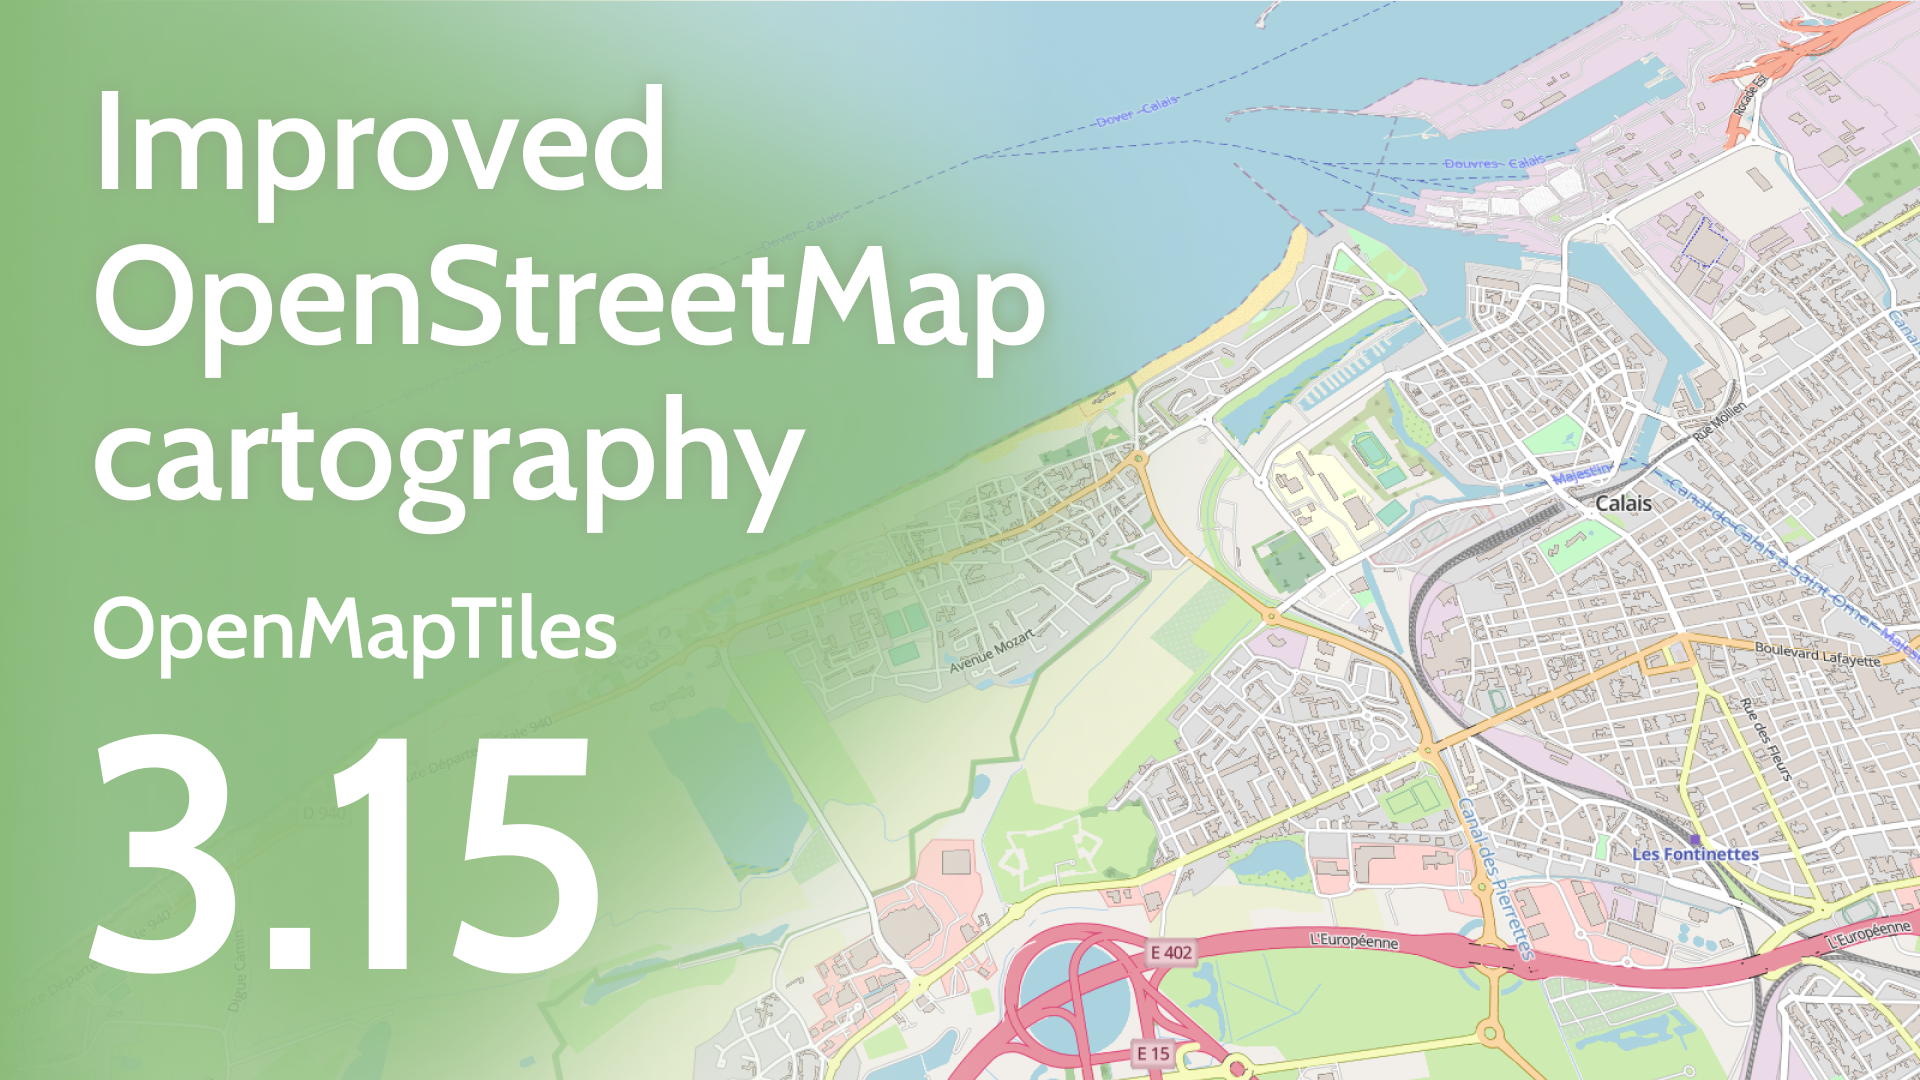 OpenStreetMap data prepared for advanced cartography image